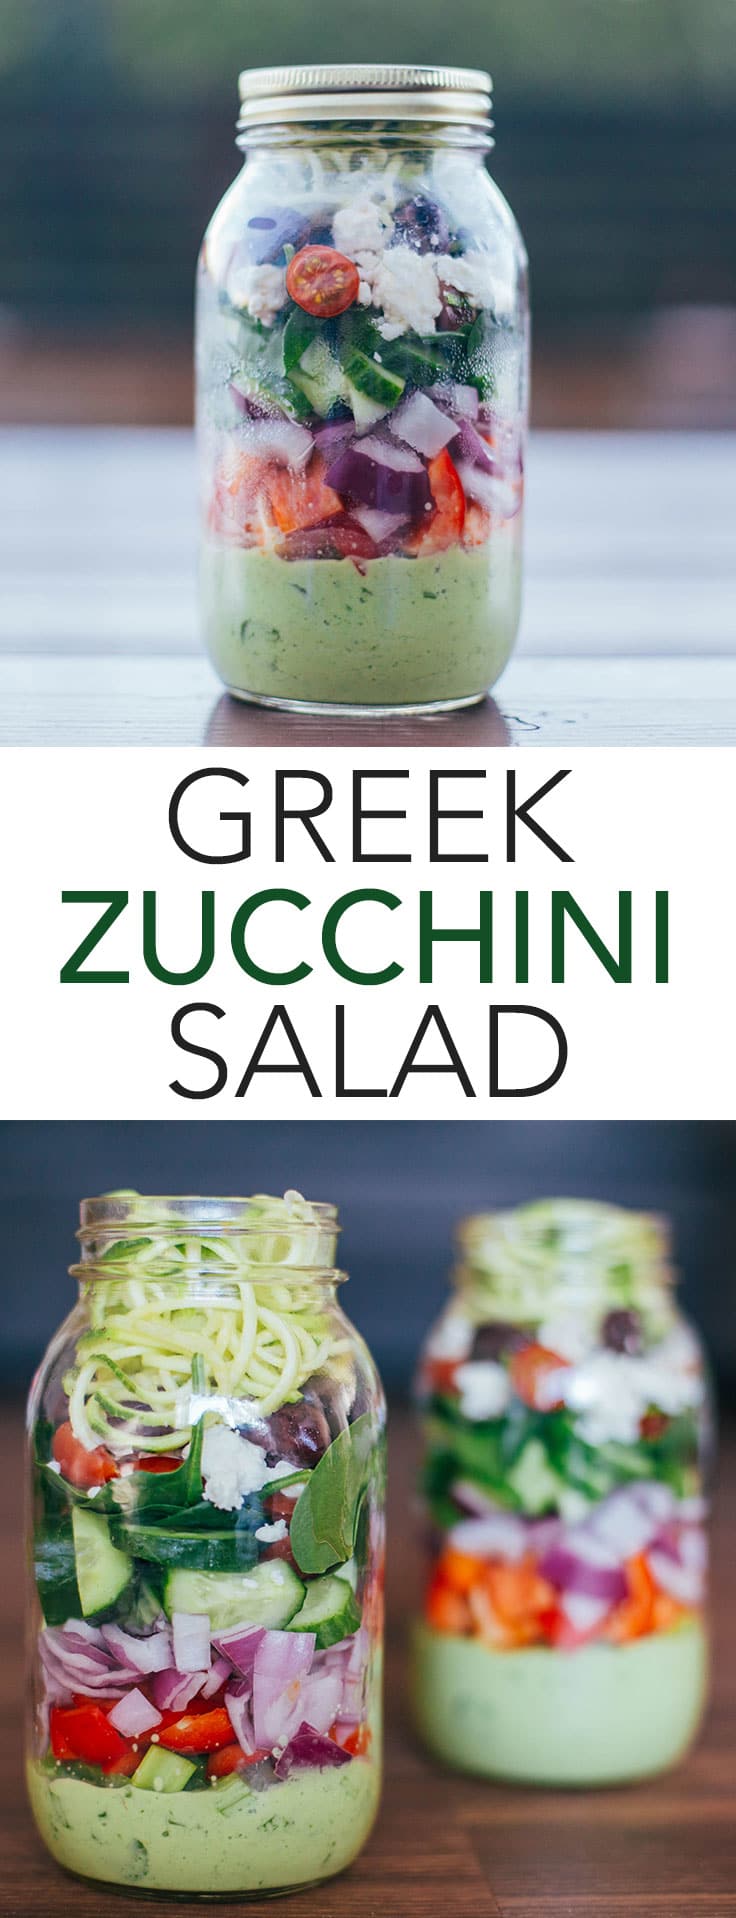 This Greek zucchini salad pairs two of our favorite healthy food trends – zucchini noodles and Mason jar salads – into one recipe.